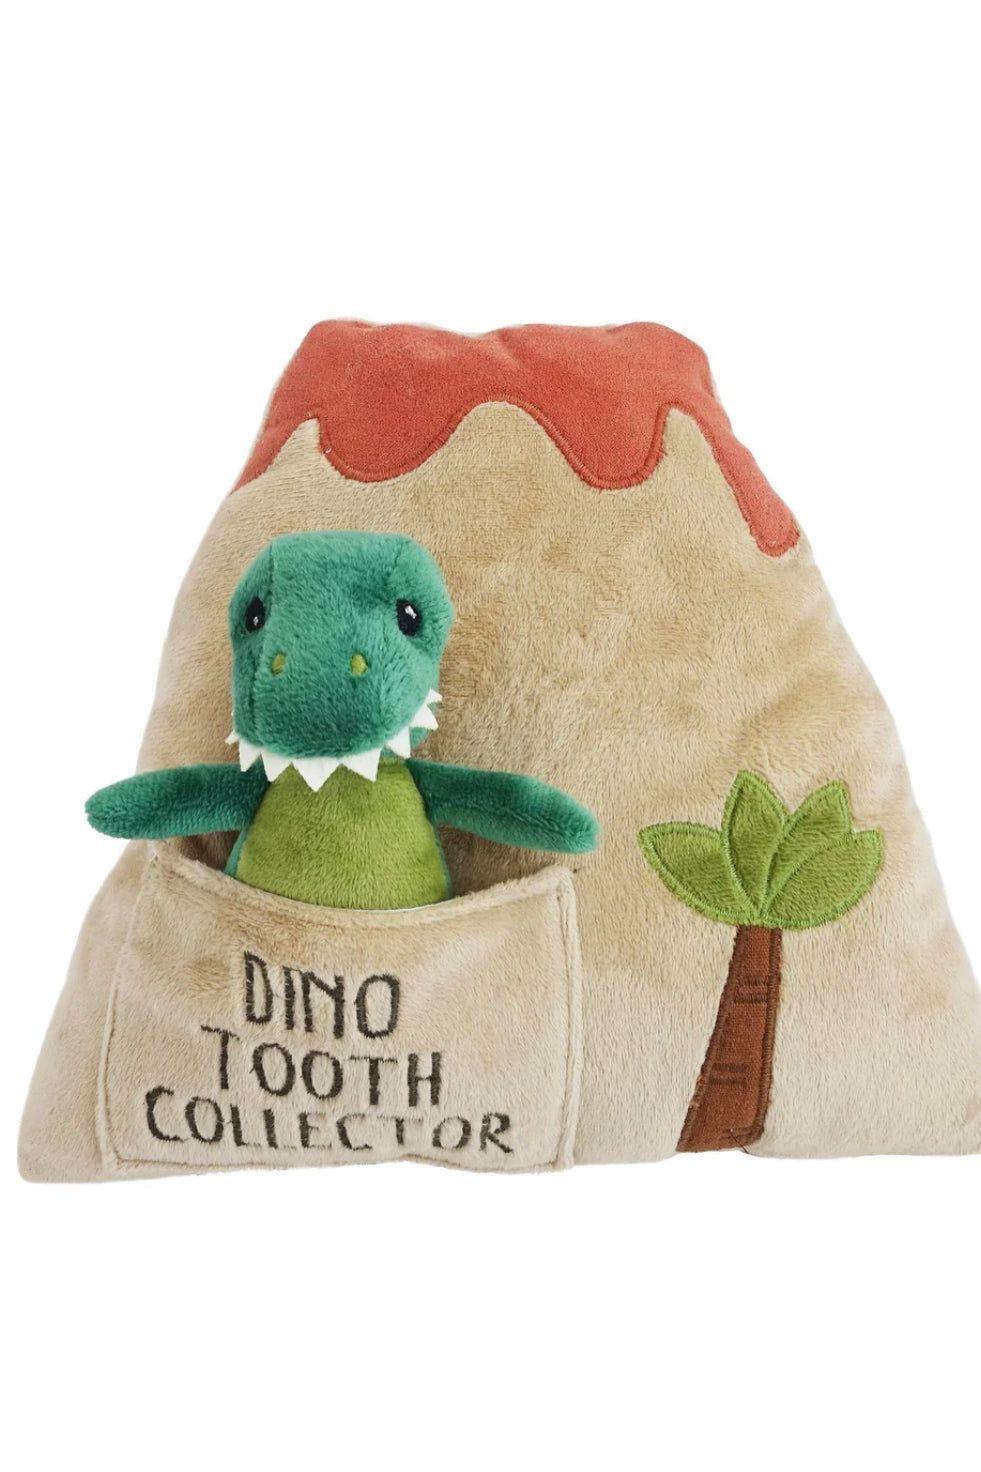 Dino Island Tooth Fairy Pillow - Fun & Whimsical Tooth Protector!